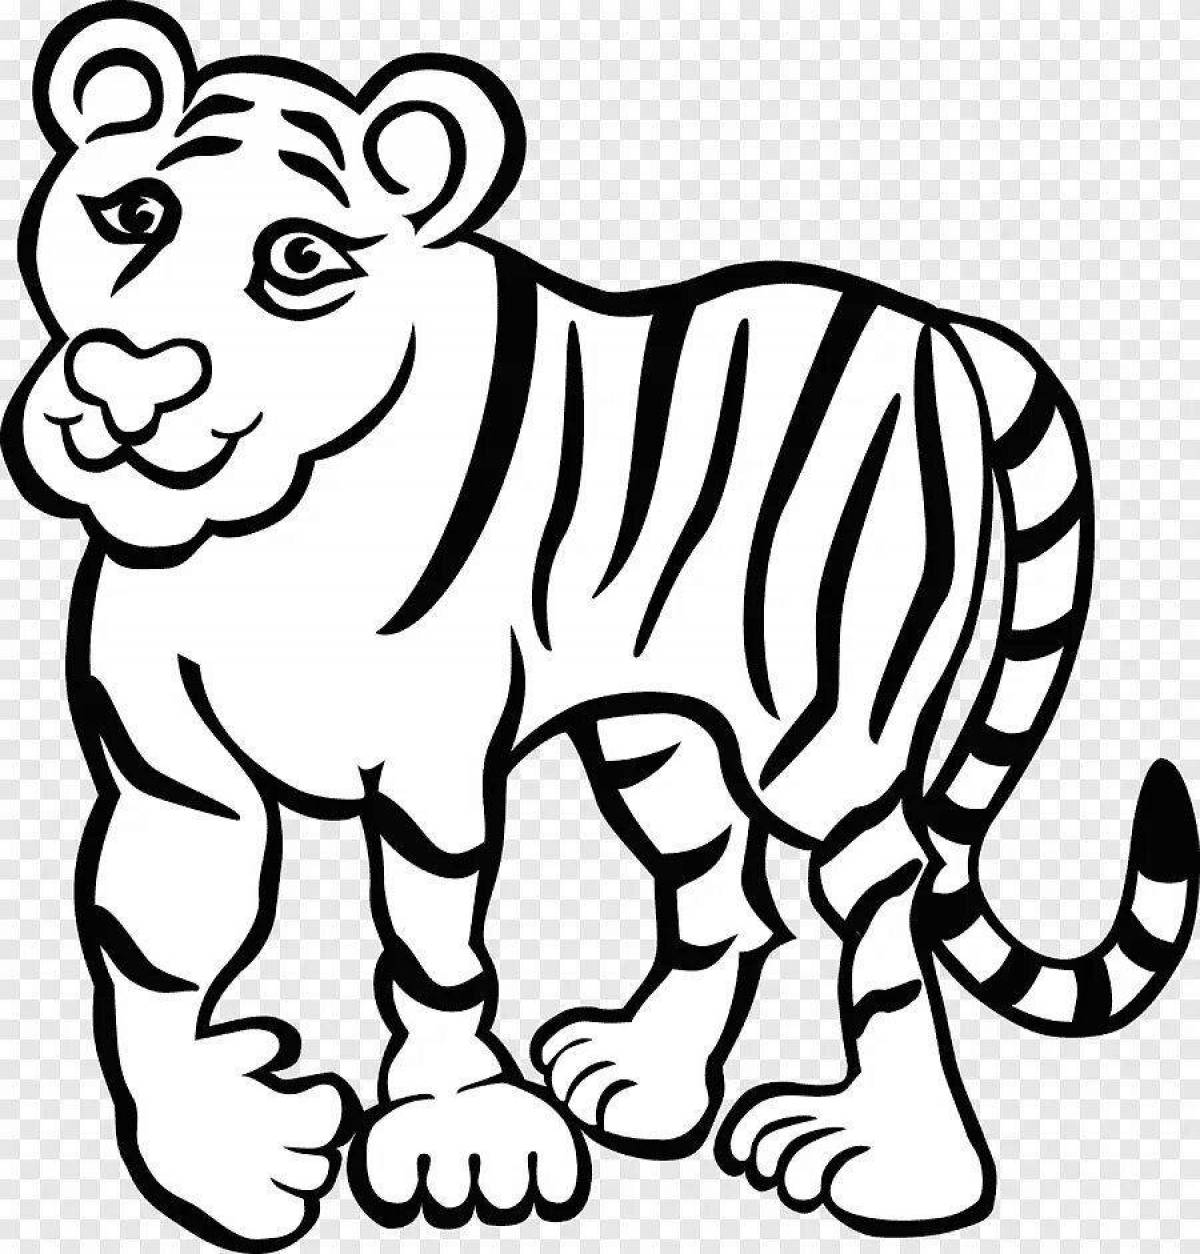 Playful tiger coloring page for kids